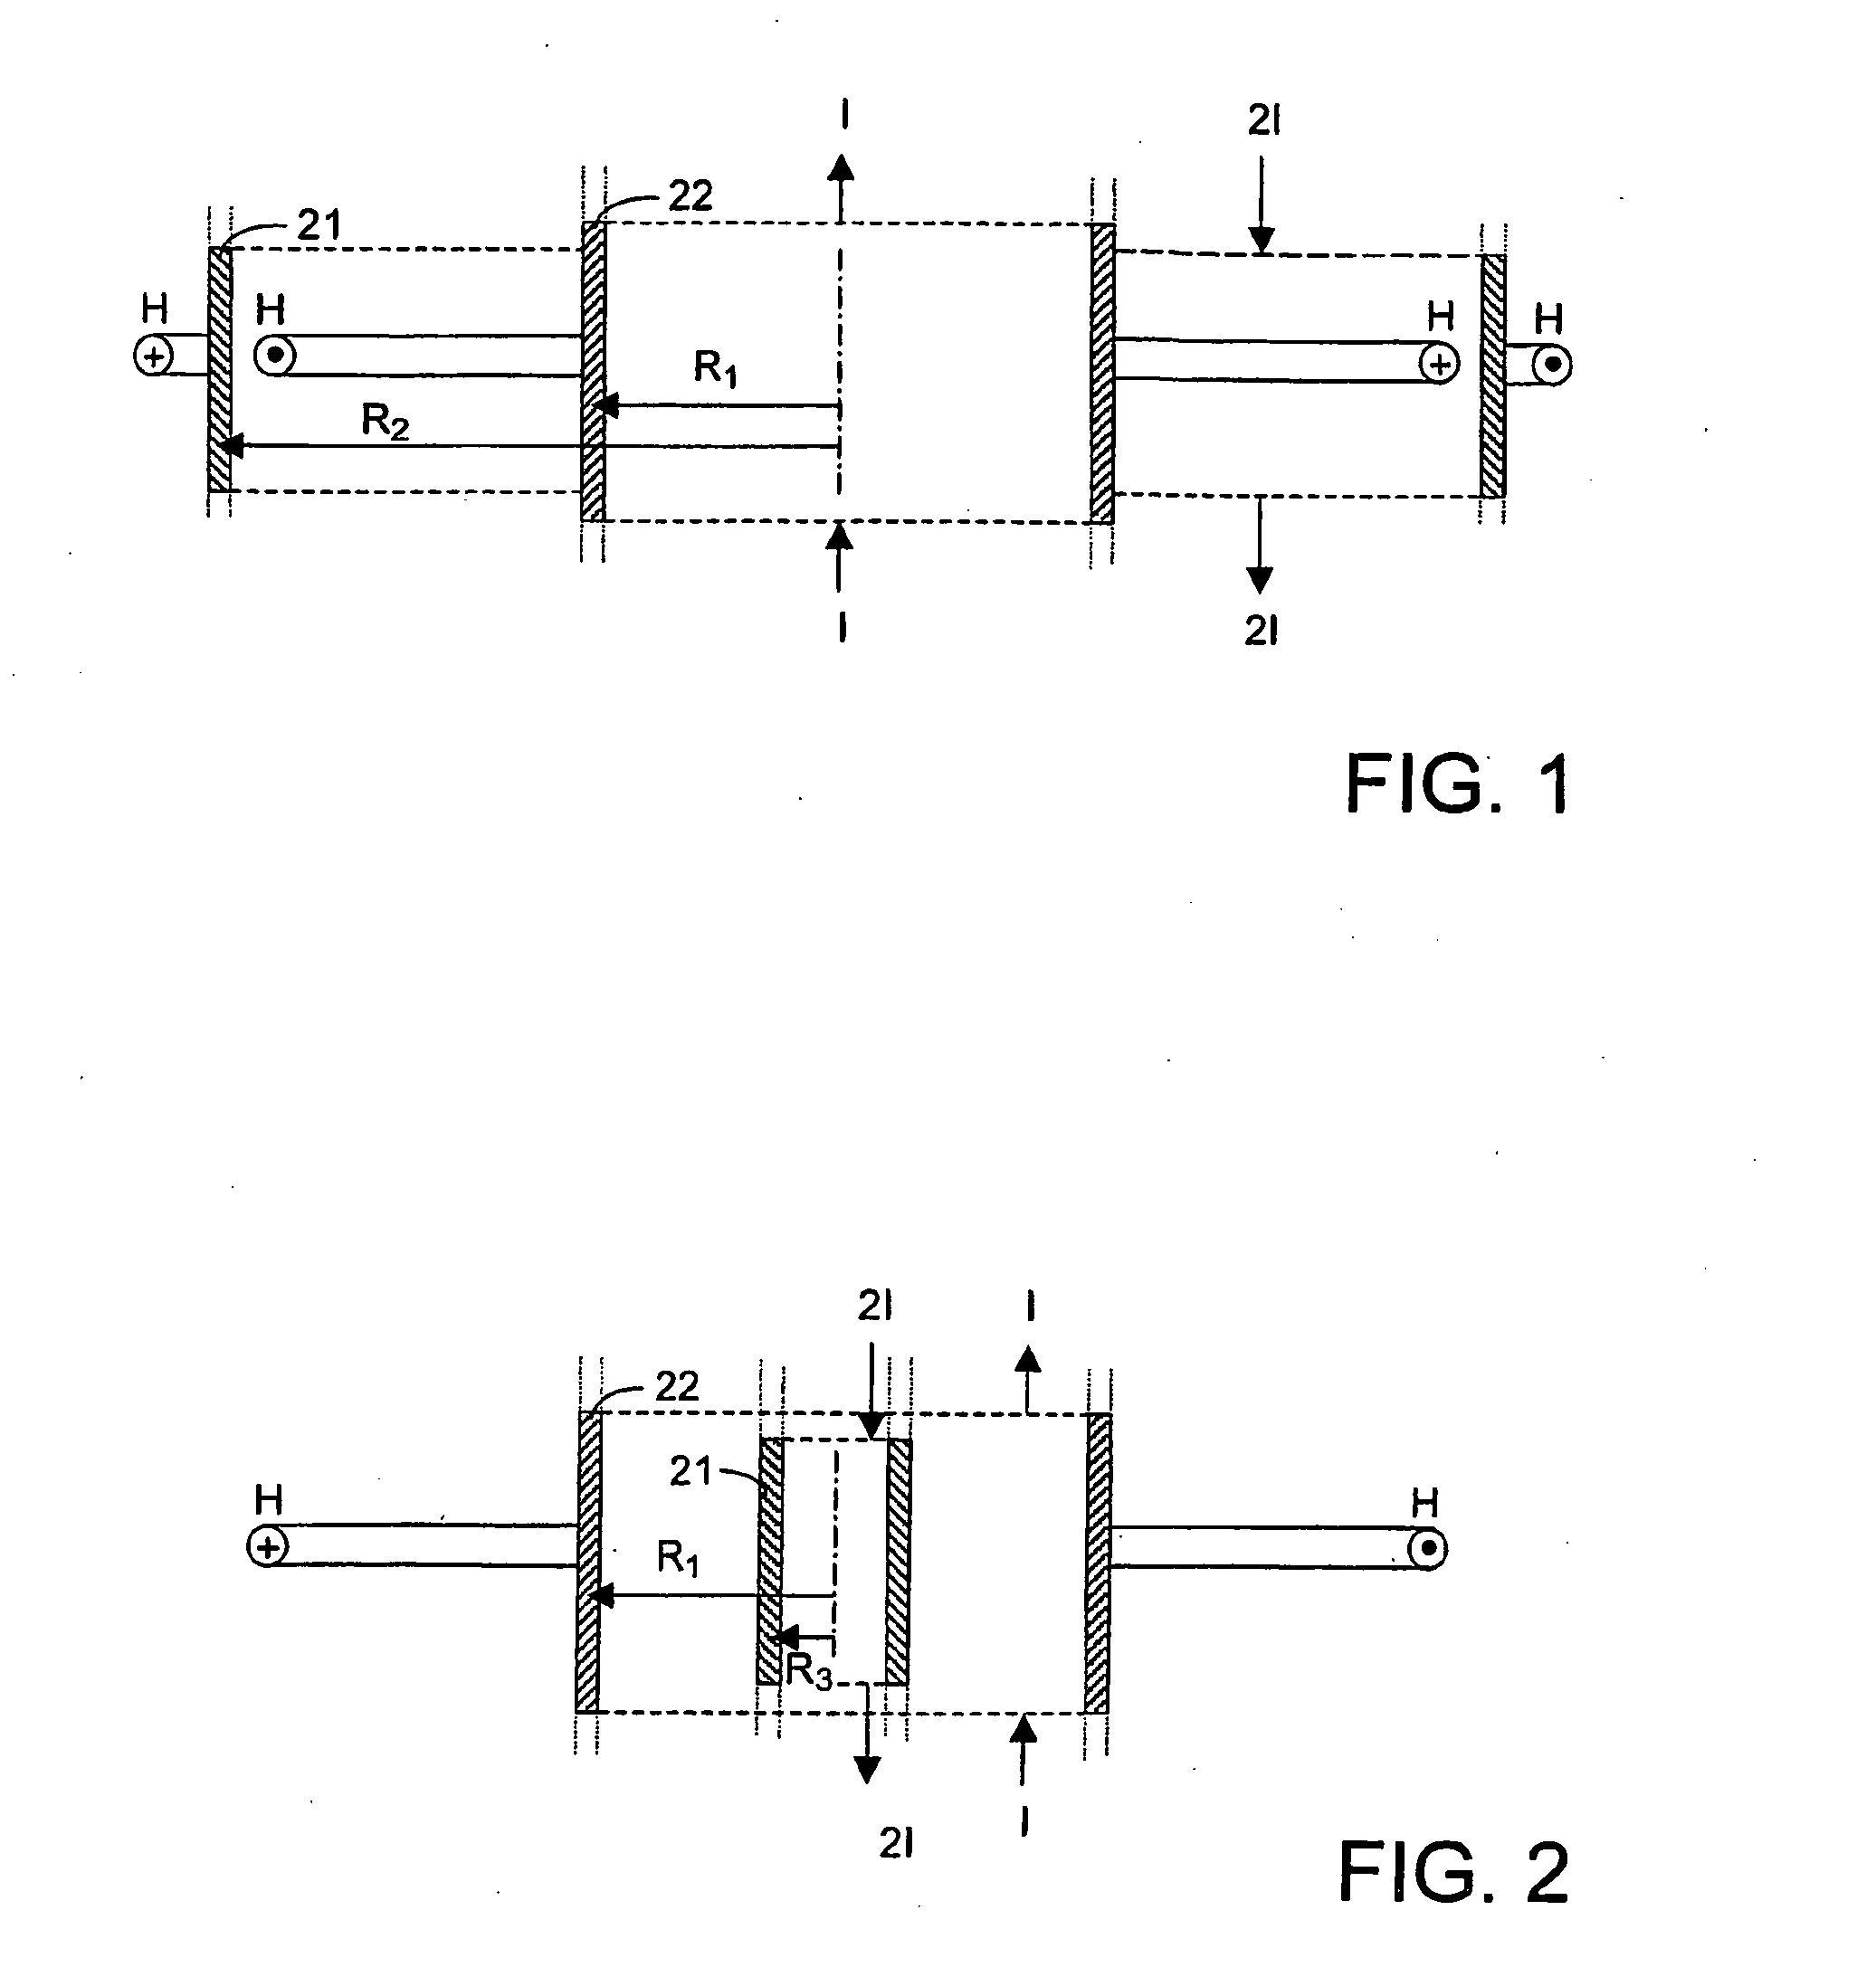 Pulsed Power System Including a Plasma Opening Switch